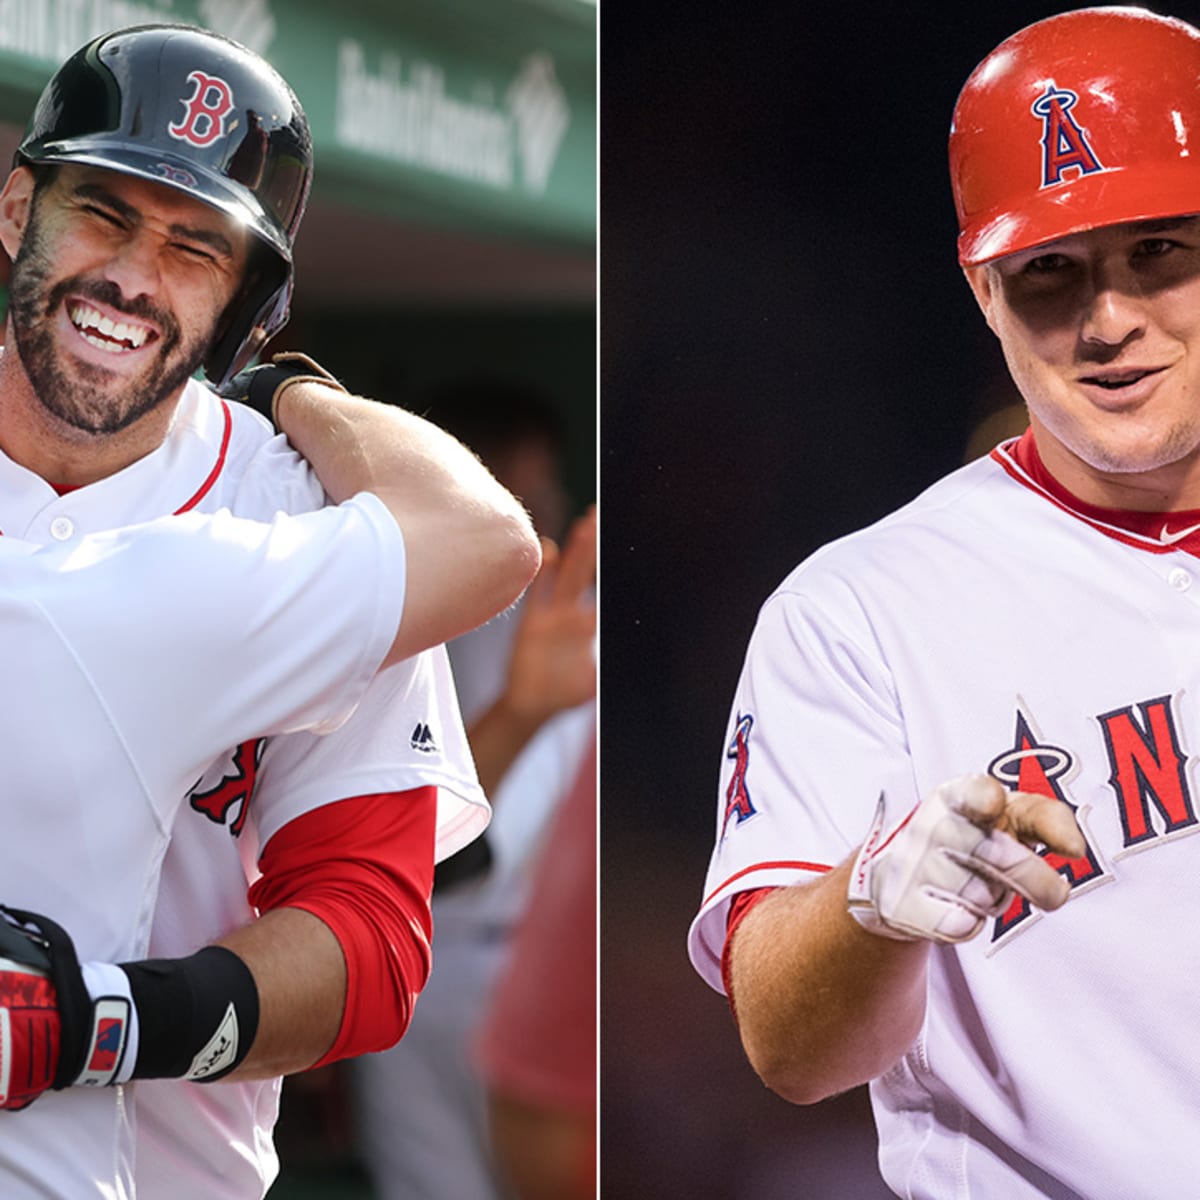 Here's how the Red Sox debuts of J.D. Martinez and Manny Ramirez compare